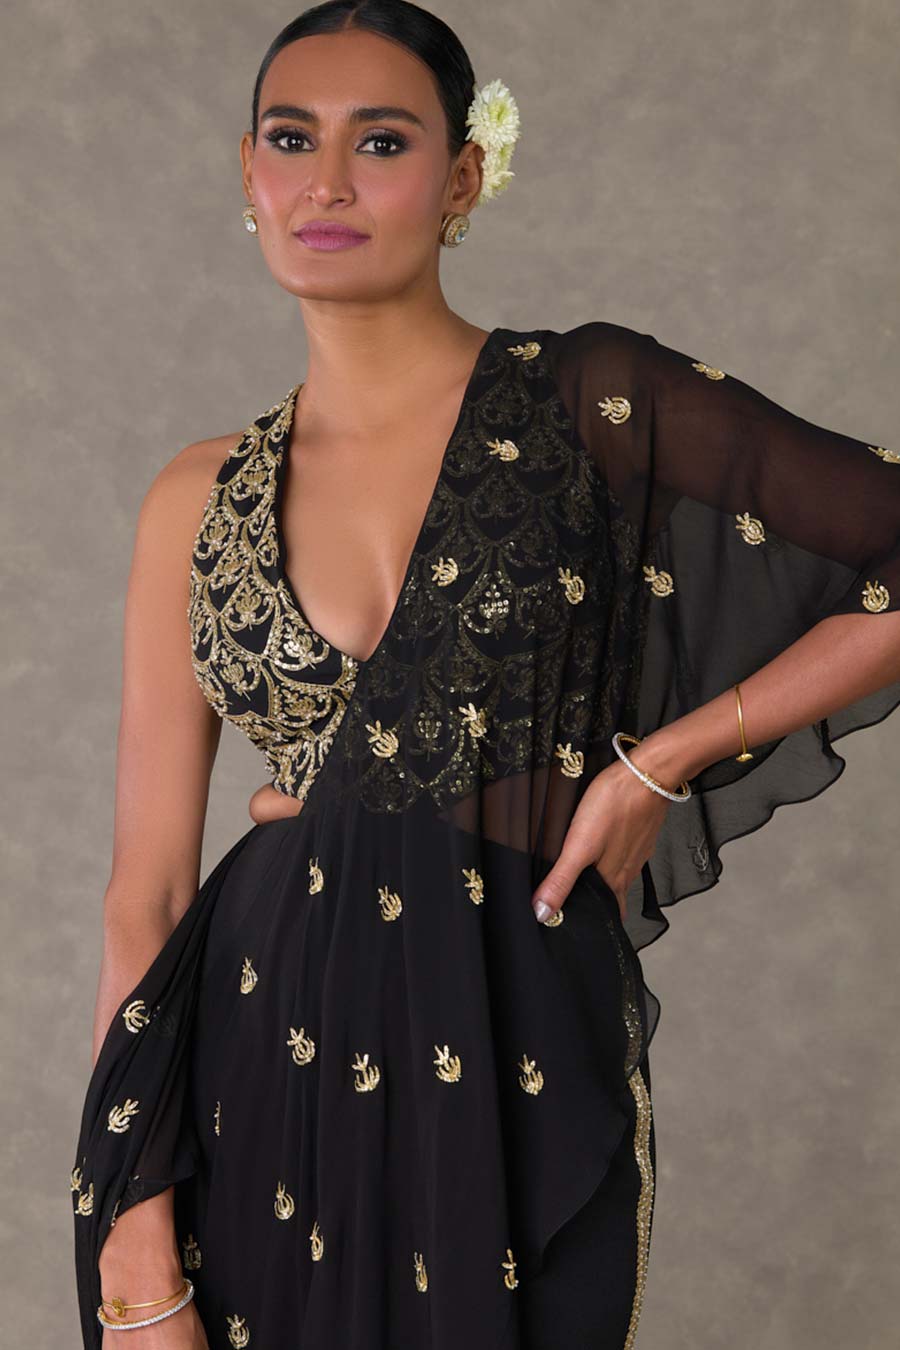 Black Paan-Phool Embroidered Saree Gown